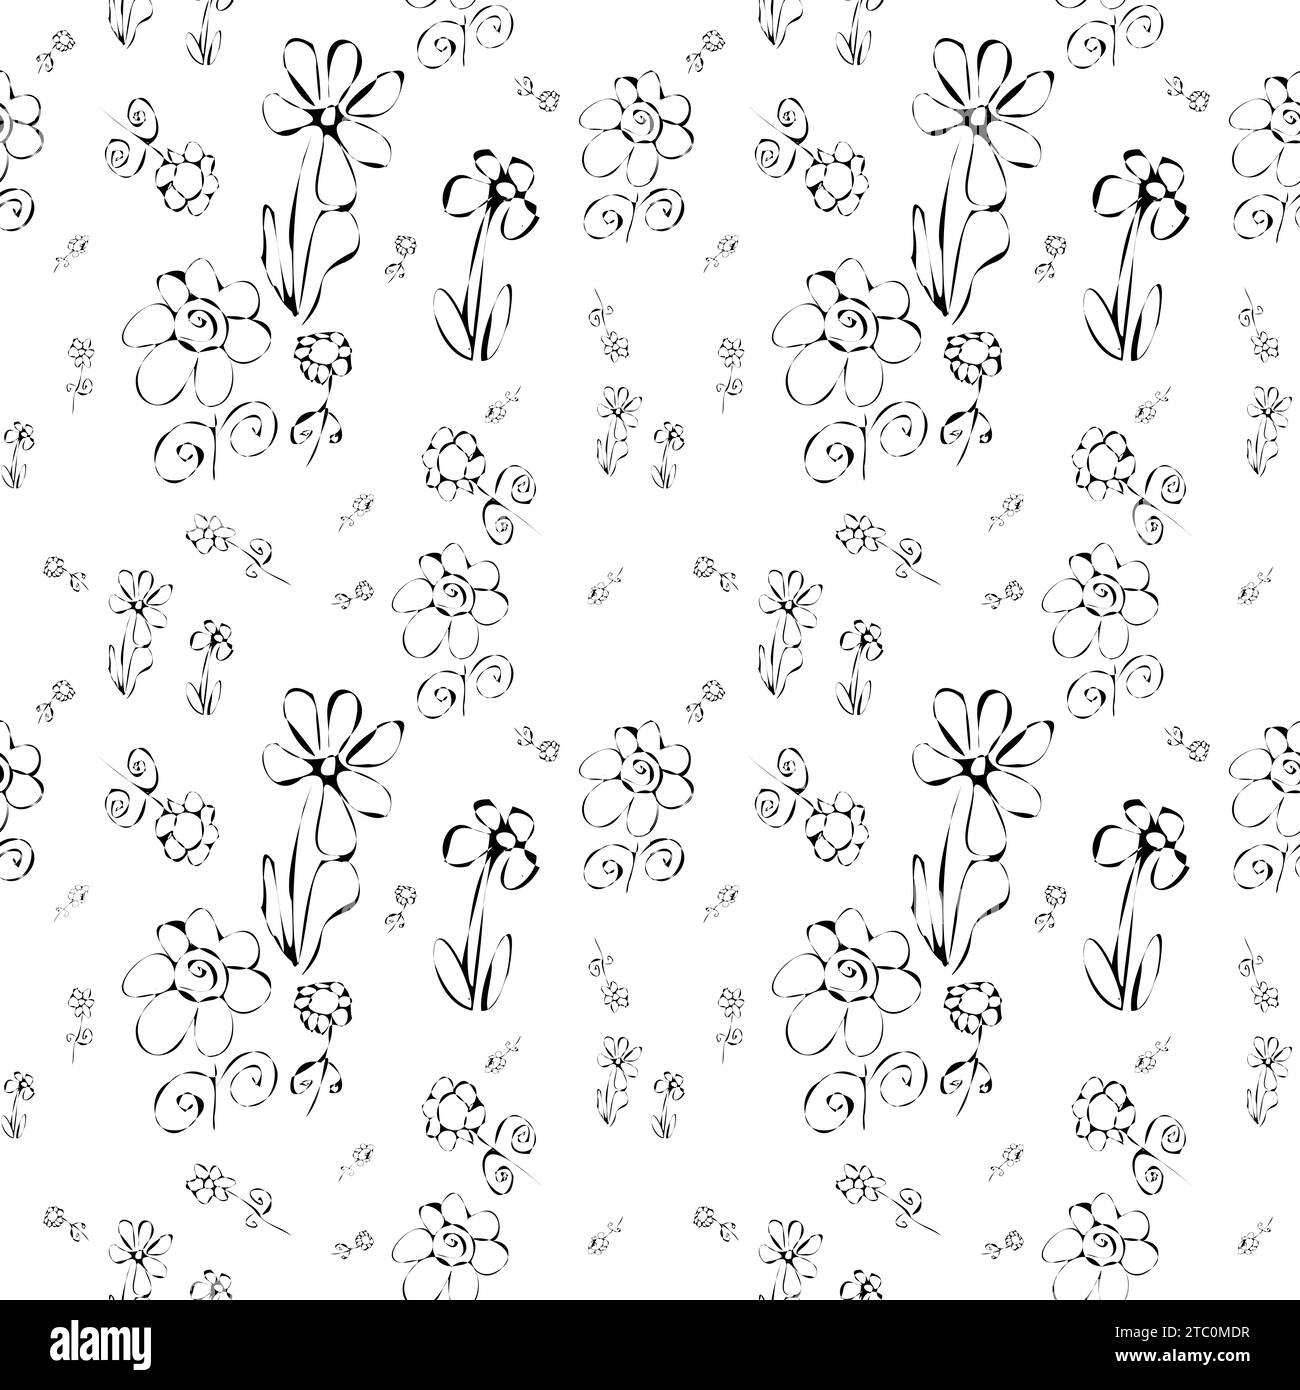 Seamless nature pattern with black and white hand drawn flowers of different sizes. Vector illustration. Stock Photo